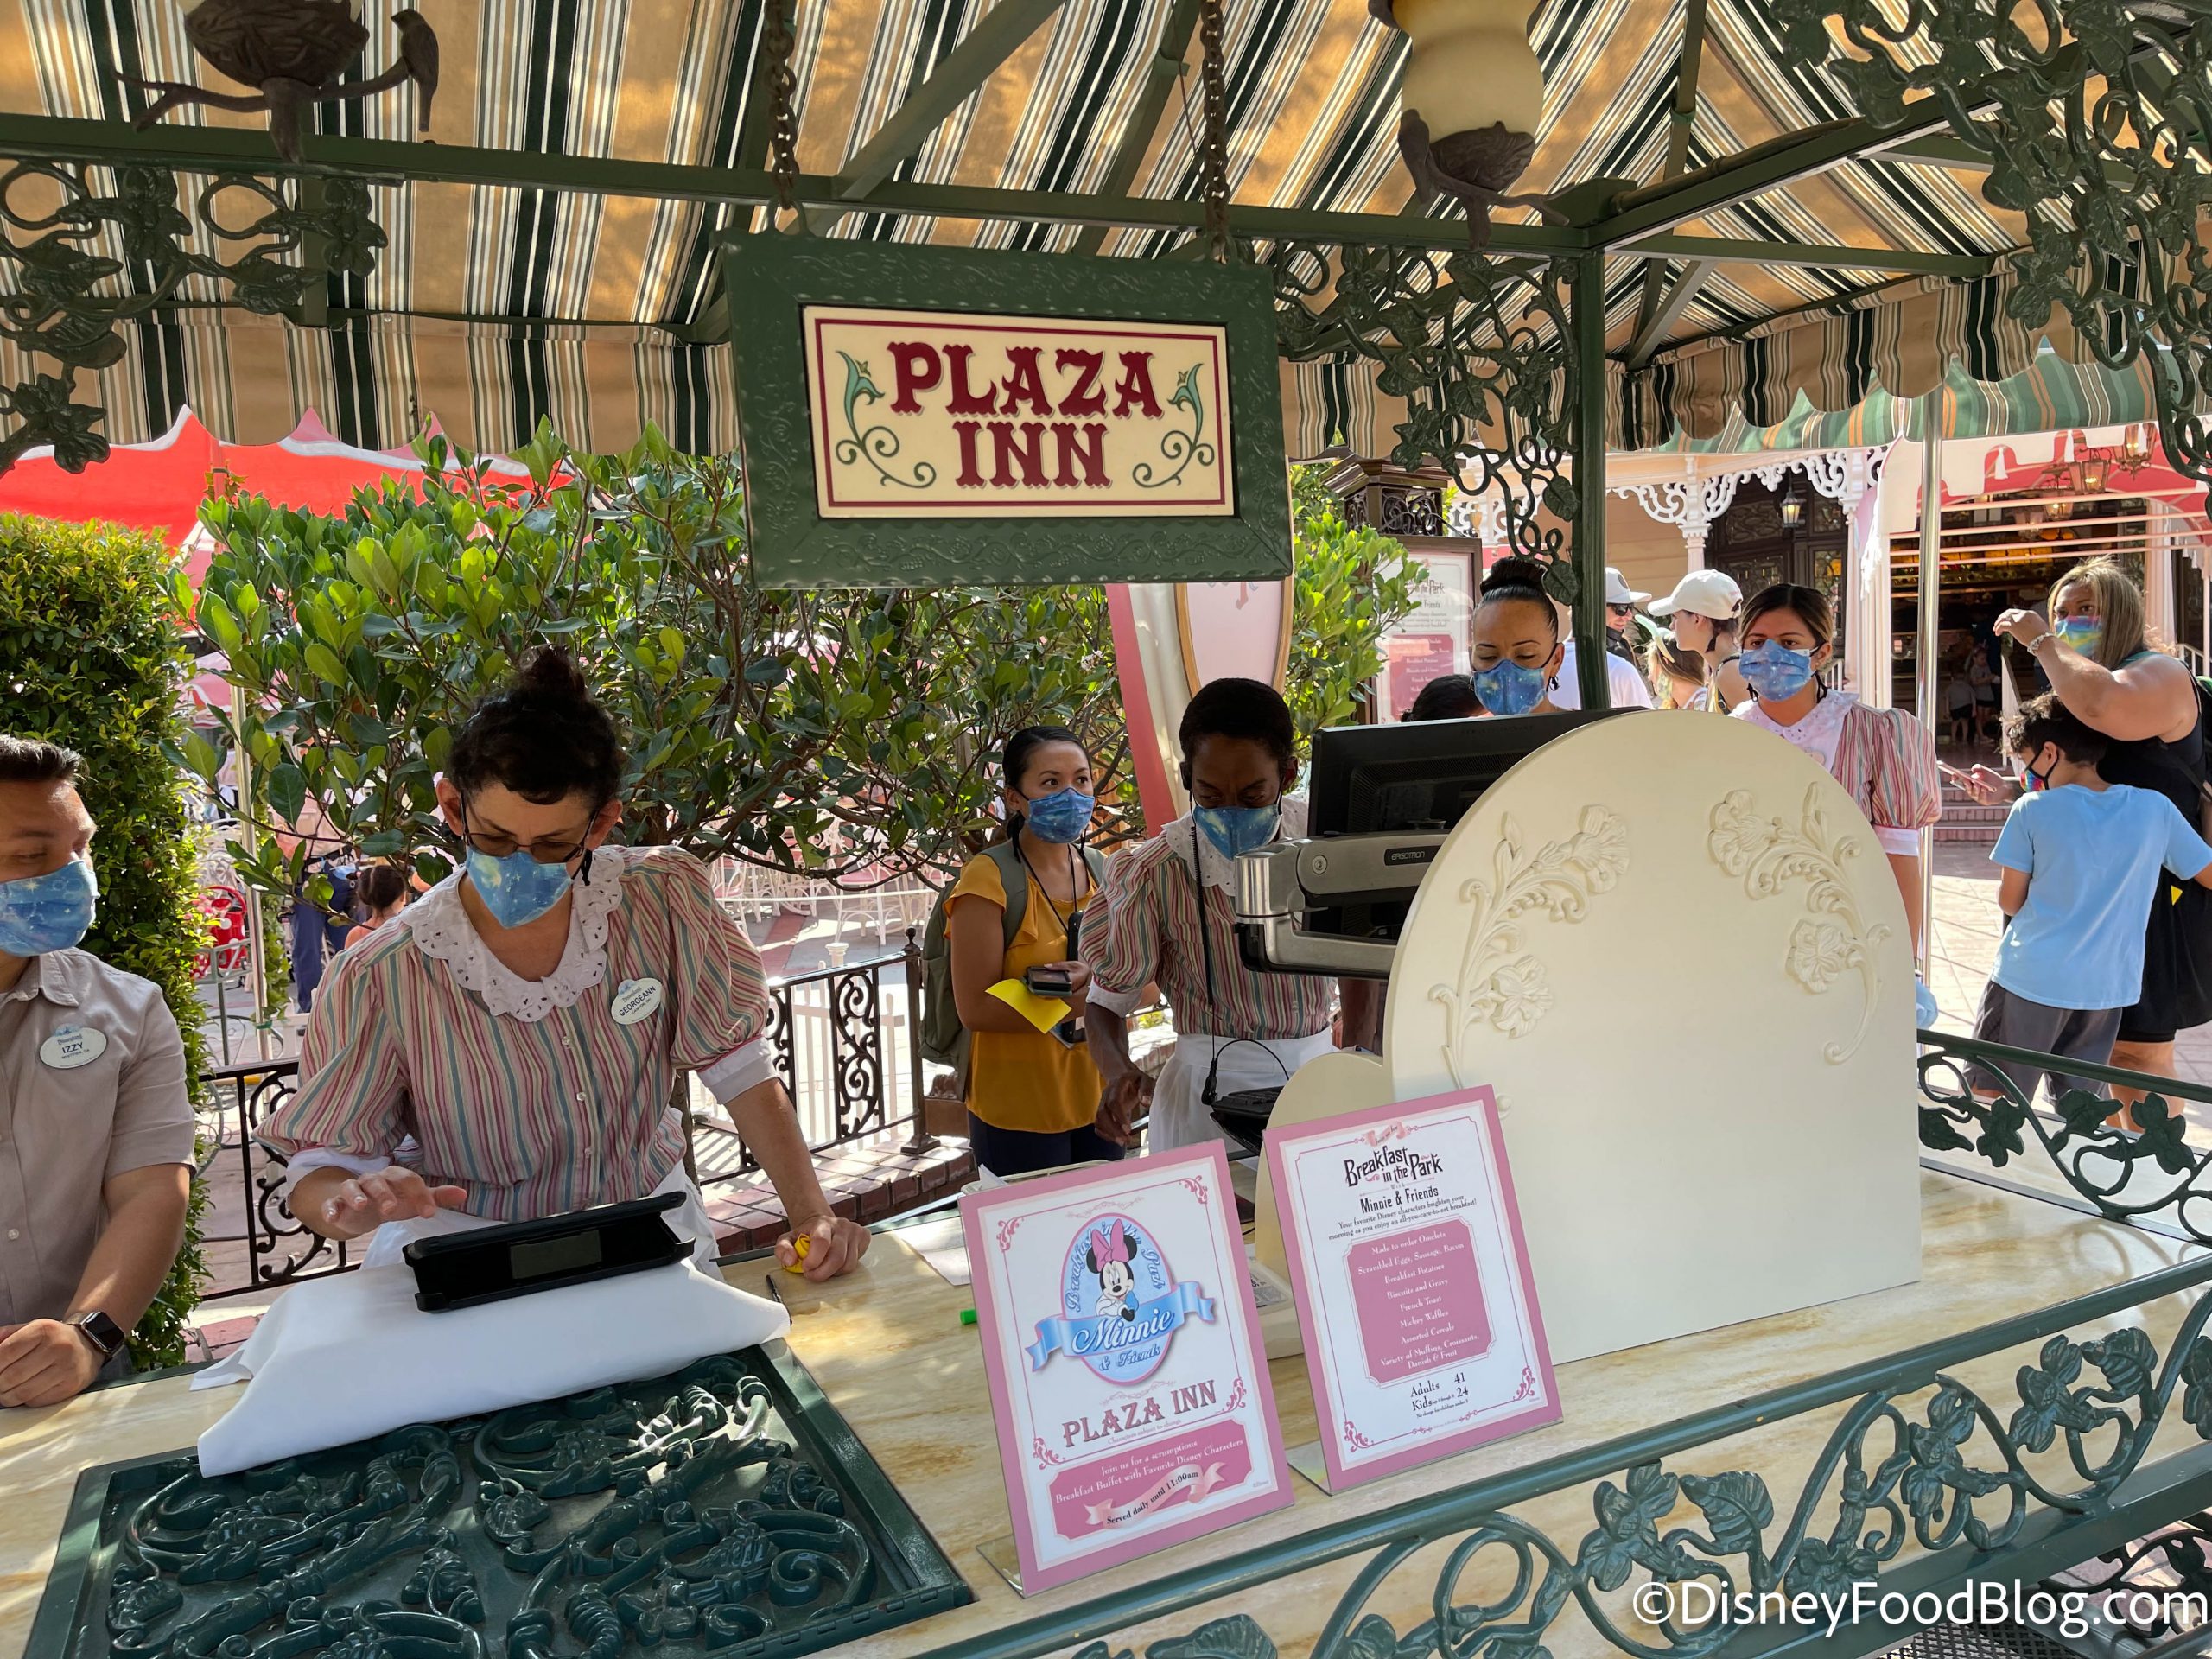 FIRST LOOK at a Reopened Plaza Inn Character Breakfast in Disneyland